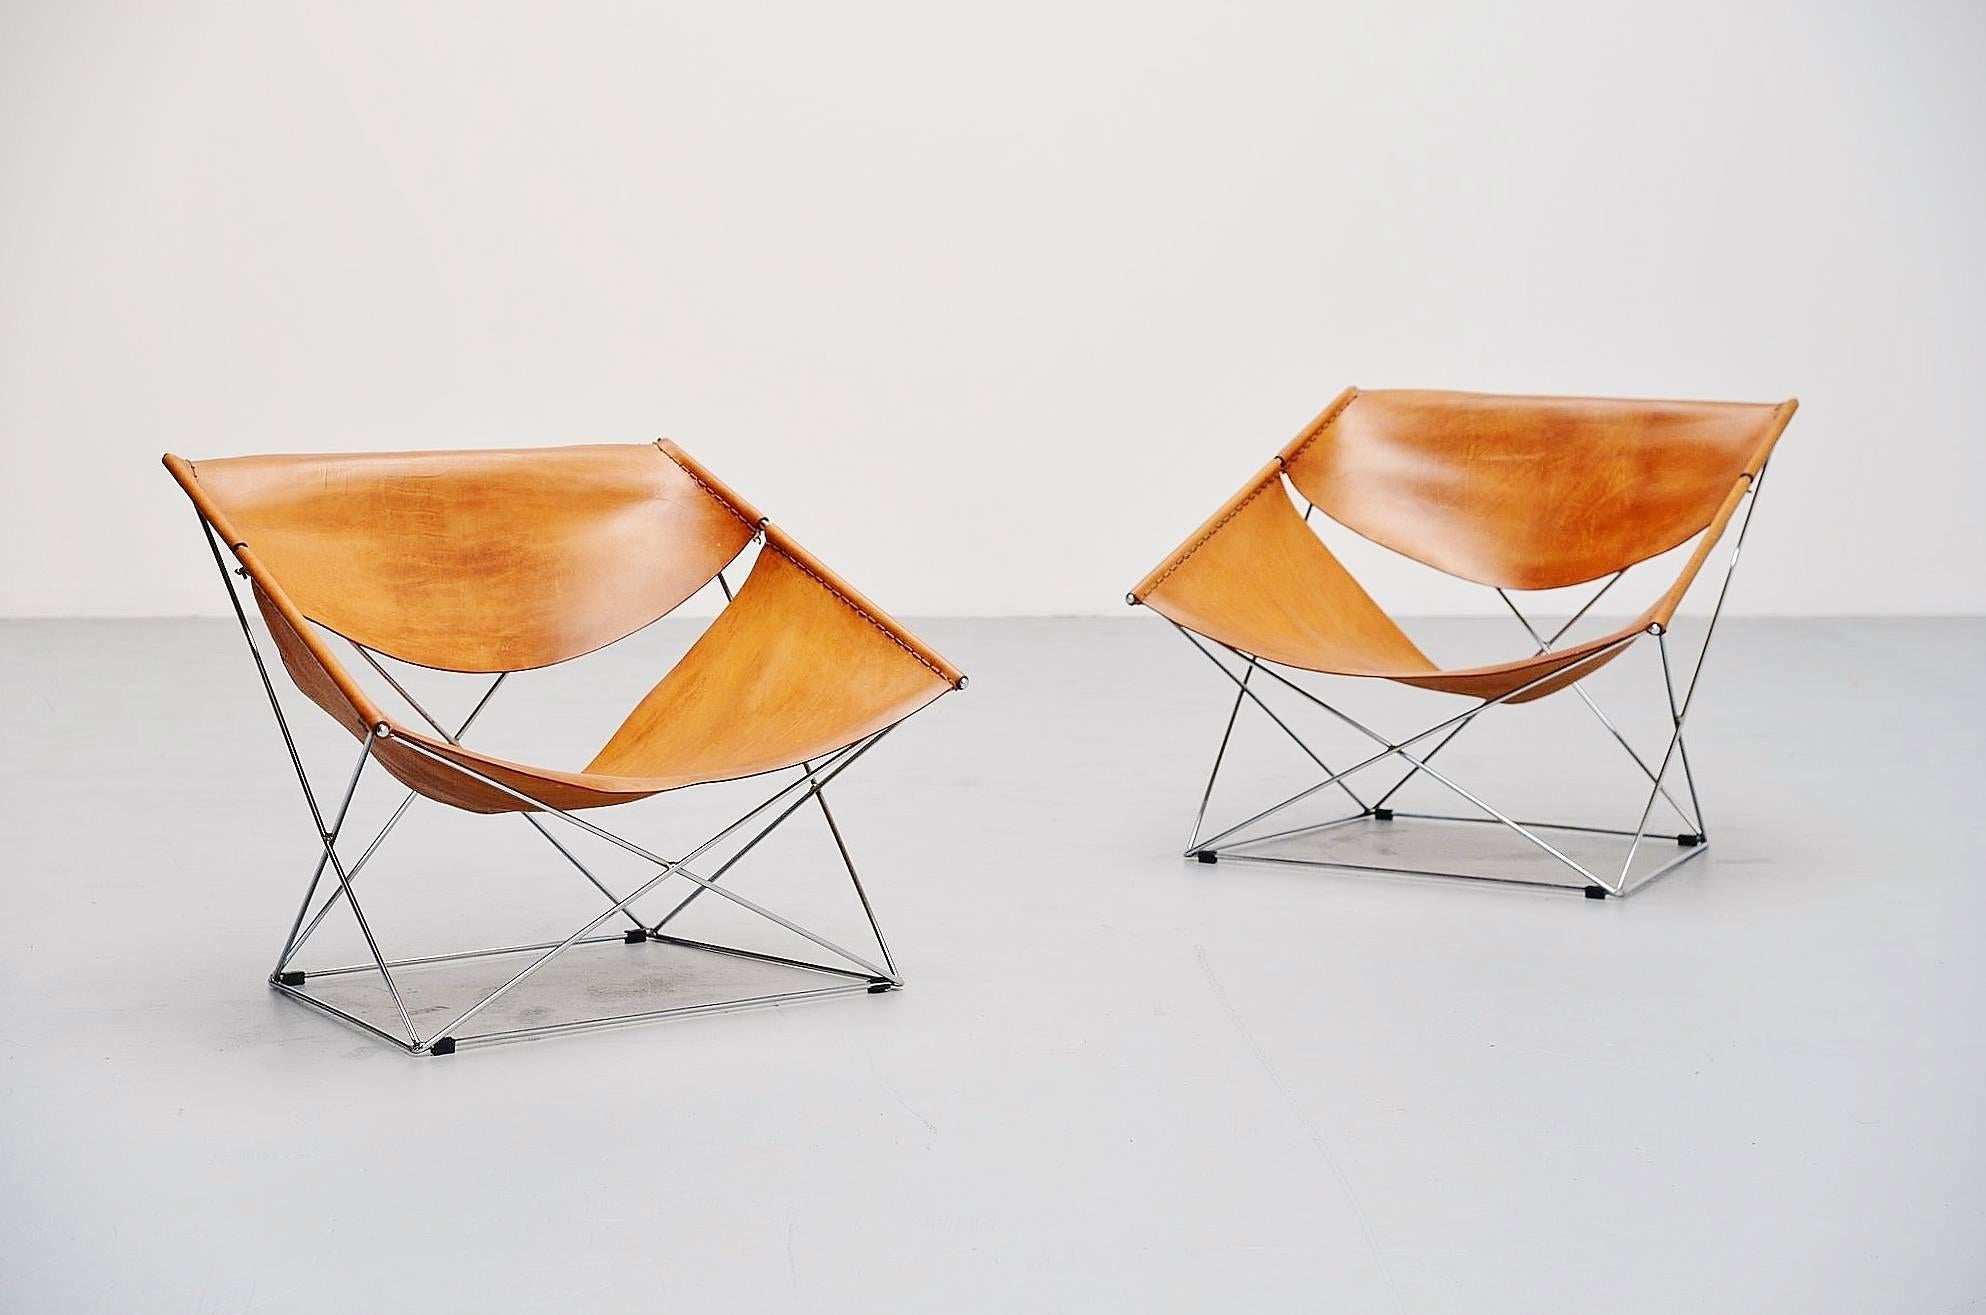 Amazing pair of lounge chairs designed by Pierre Paulin, manufactured by Artifort, Holland, 1963. These chairs are an amazing pair of early editions with fantastic patina to the natural leather seats. The frame is made of high quality chrome plated